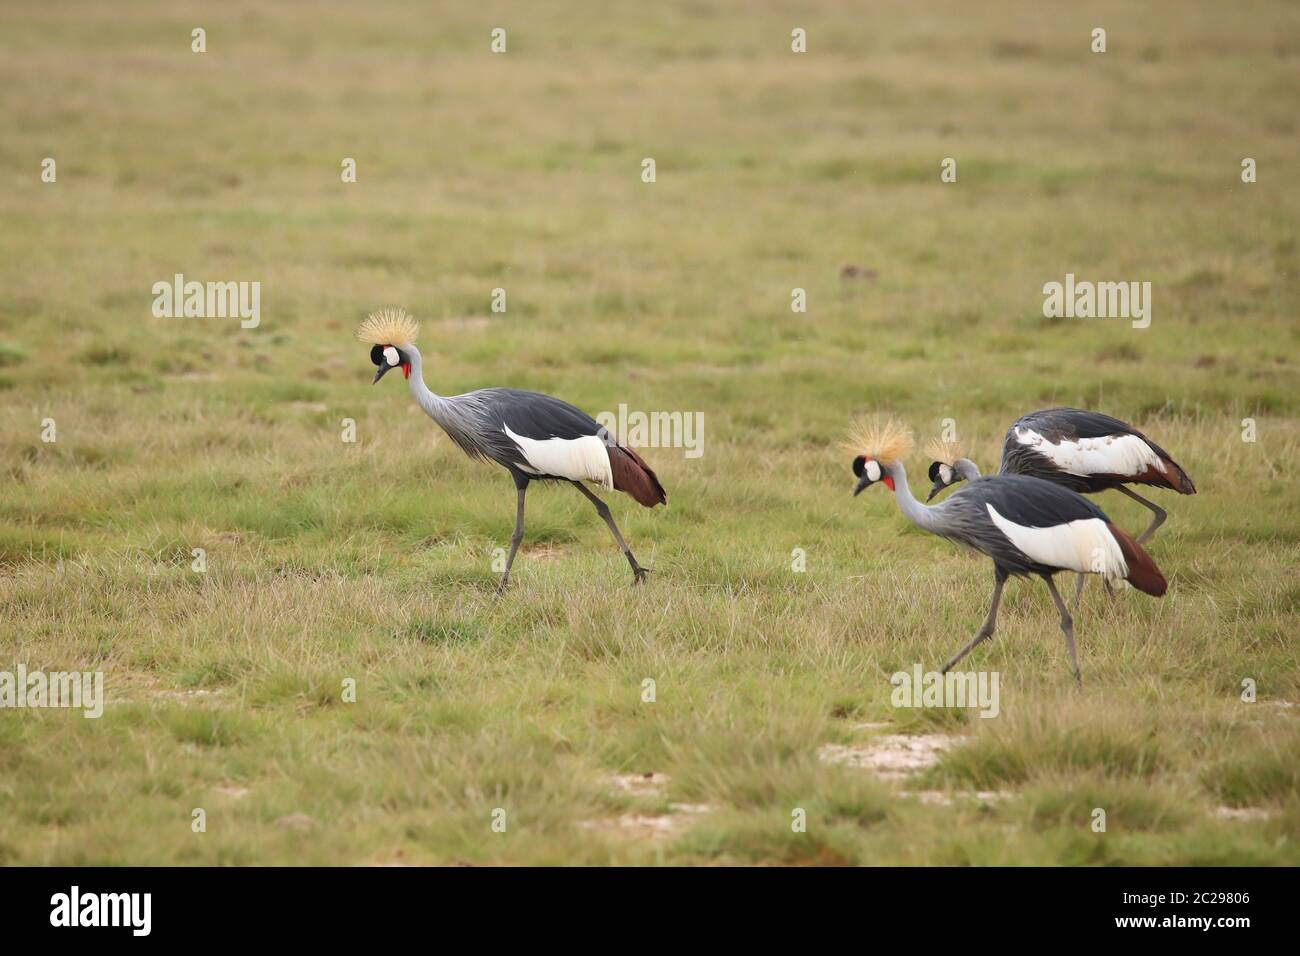 Grey crowned cranes in Amboseli National Park Stock Photo